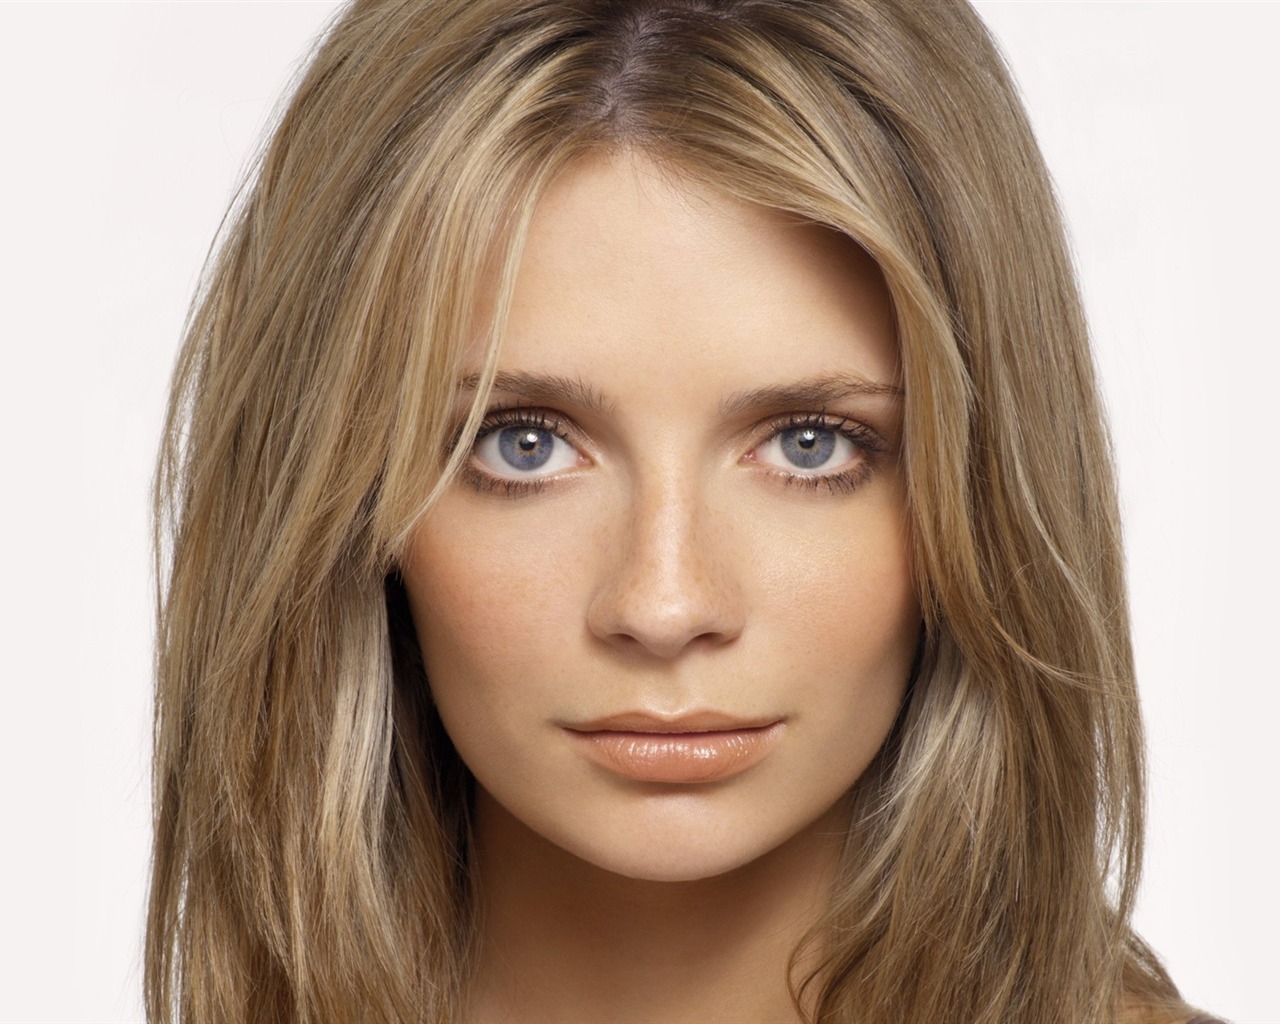 Mischa Barton #059 - 1280x1024 Wallpapers Pictures Photos Images